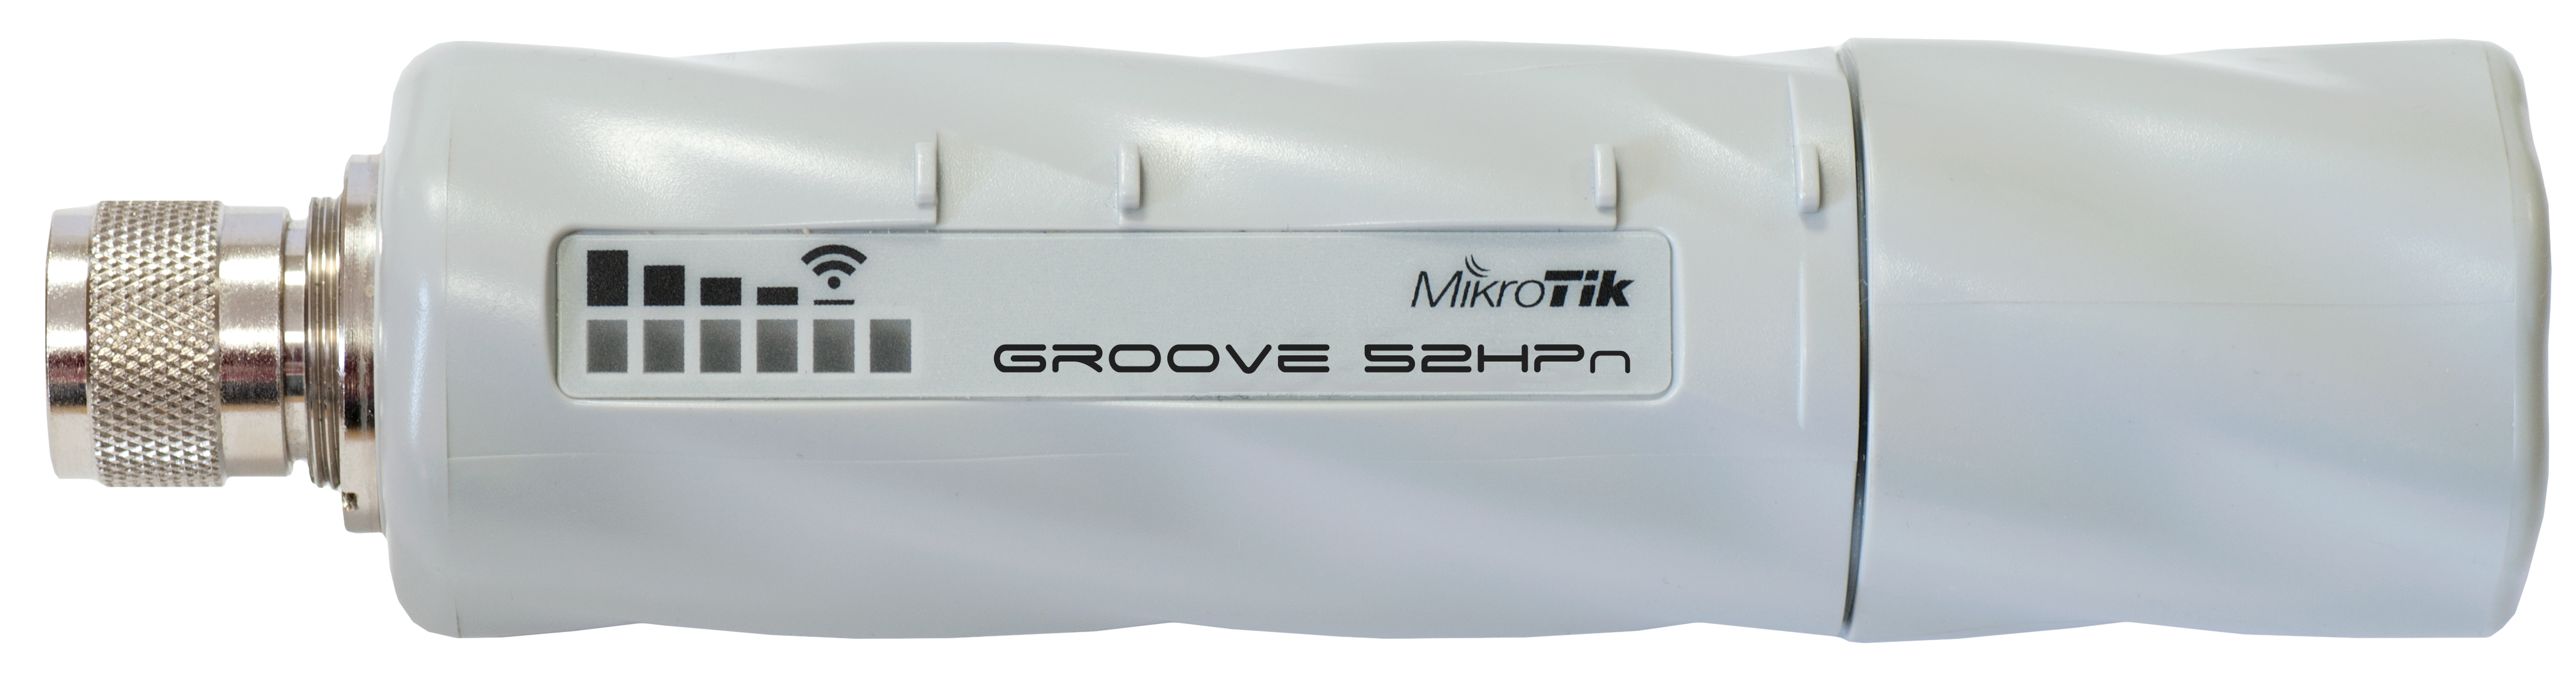 MikroTik Routers and Wireless - Products: GrooveA 52